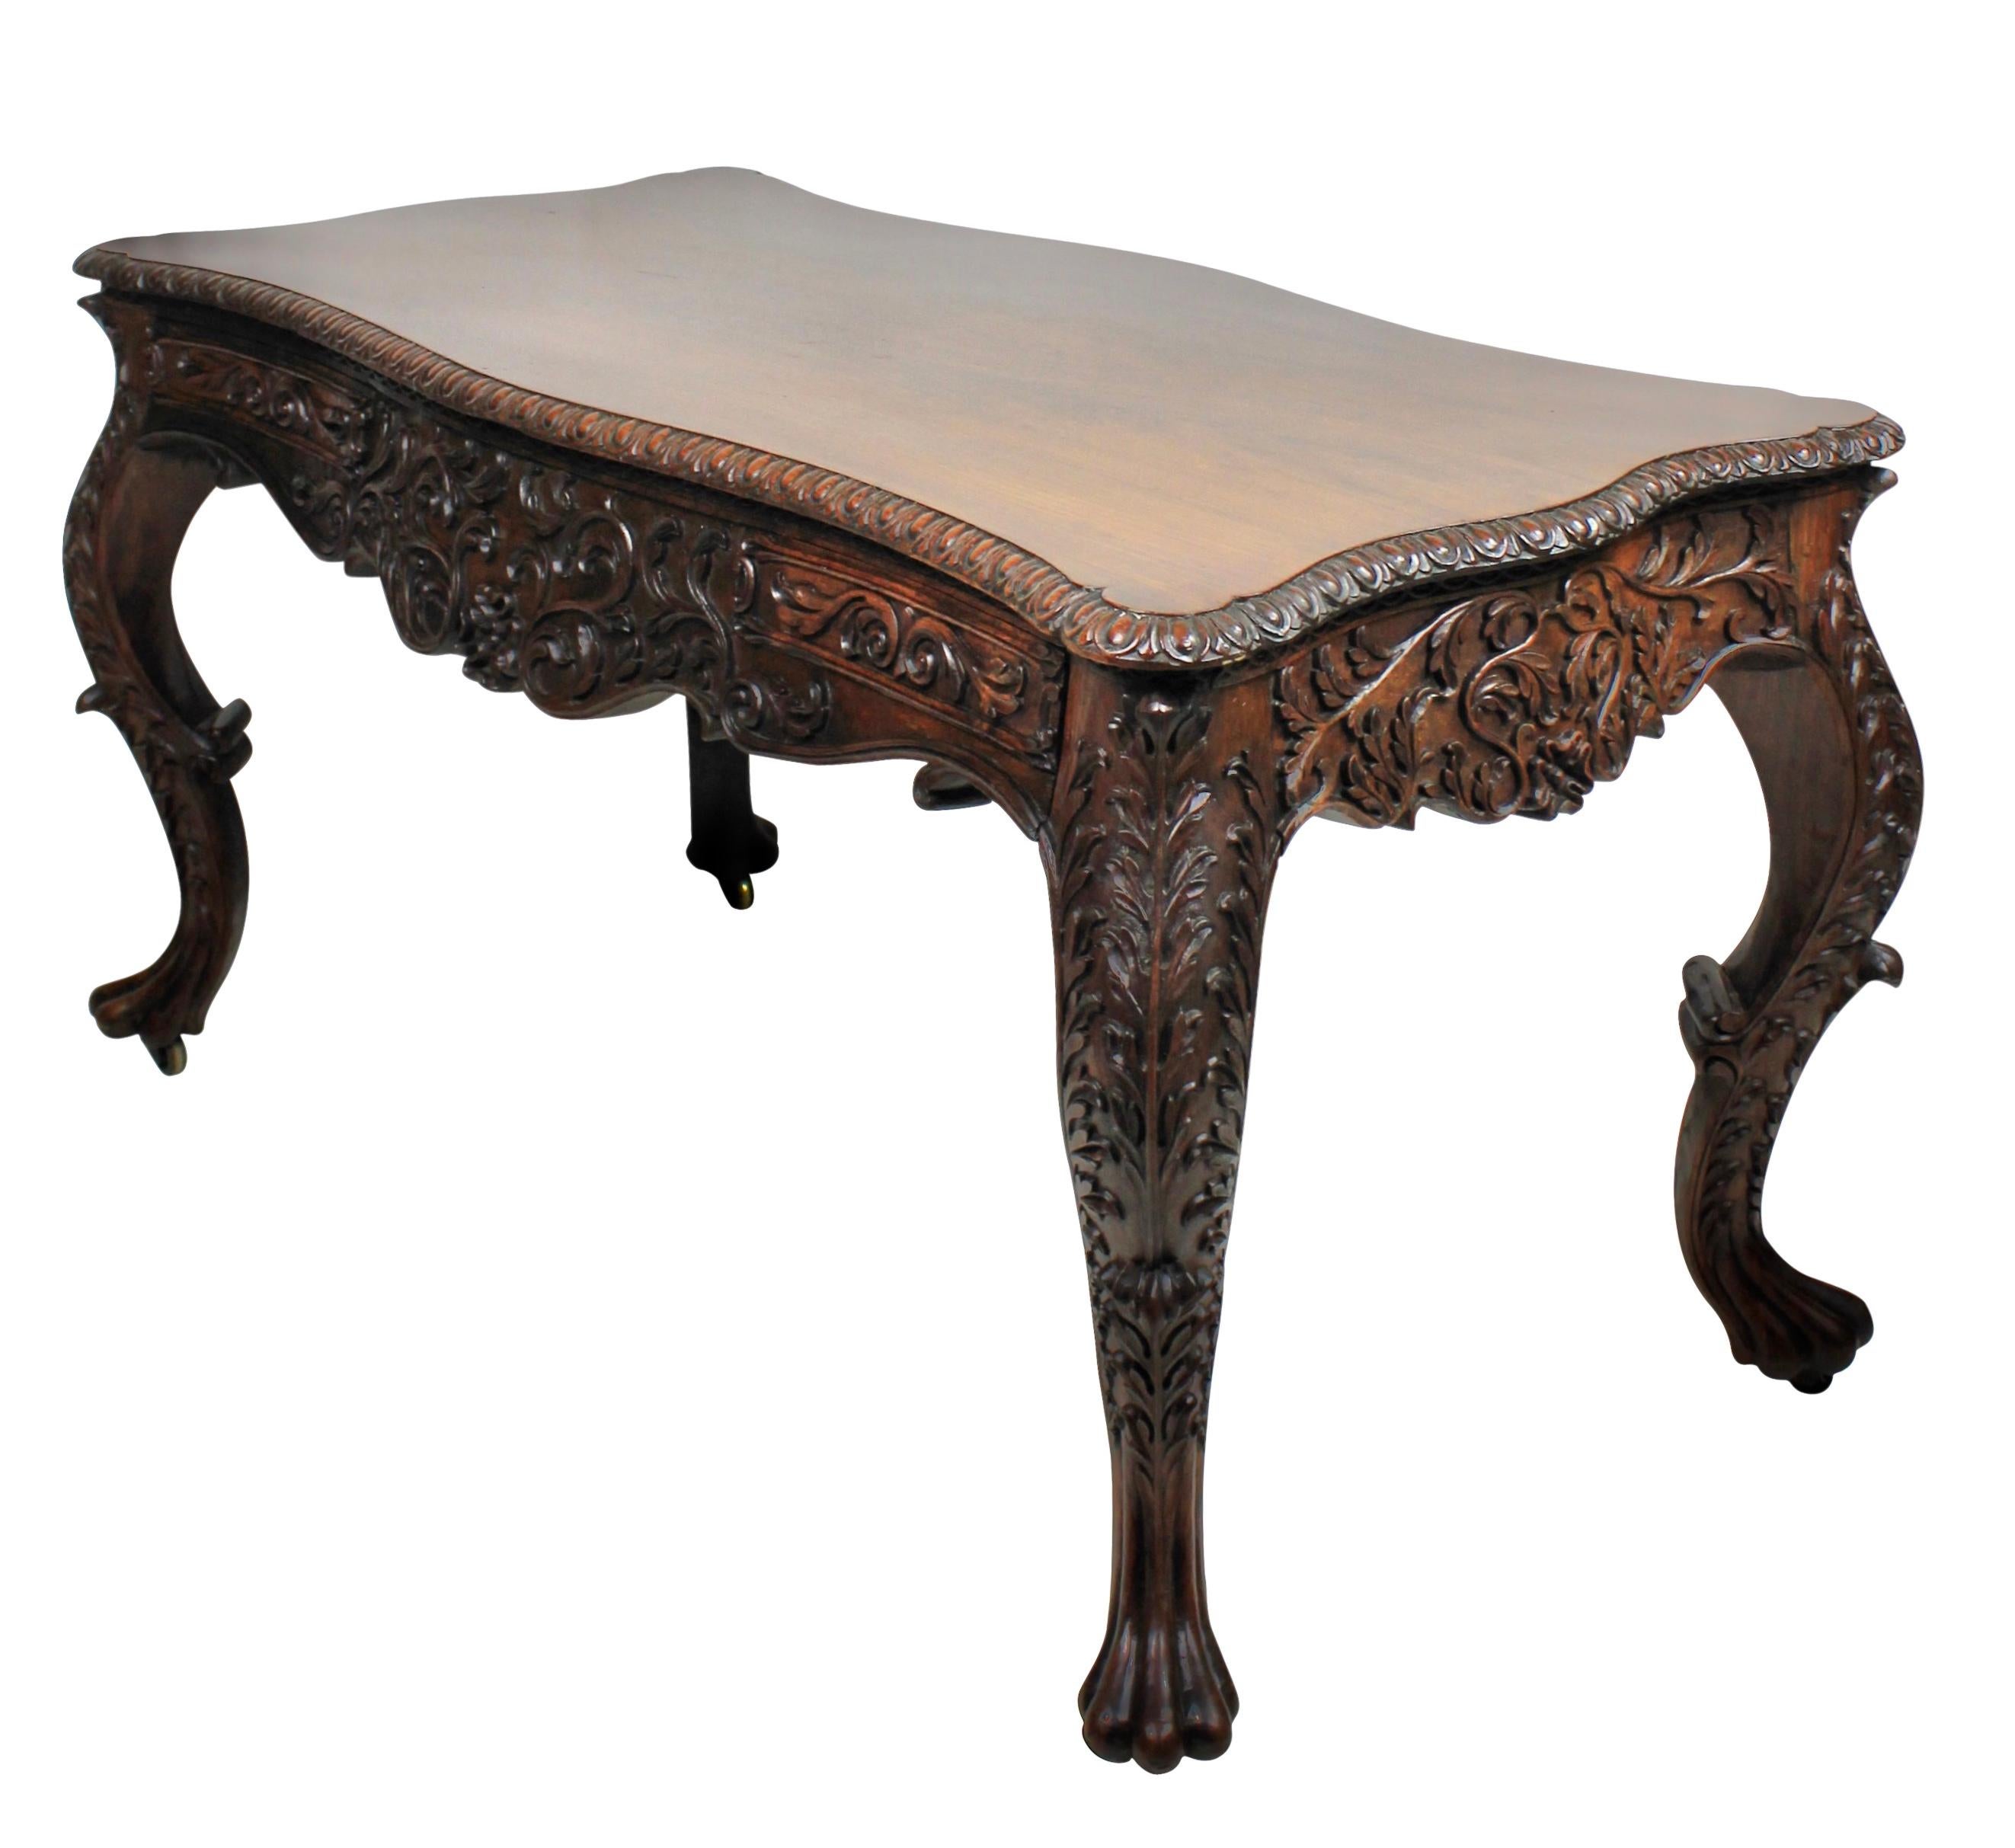 An Anglo-Indian serpentine library table of exceptional quality in solid rosewood. The intricate carving, which goes fully around & includes two drawers on one side & two ''dummy'' drawers on the other, is absolutely superb. The swept cabriole legs